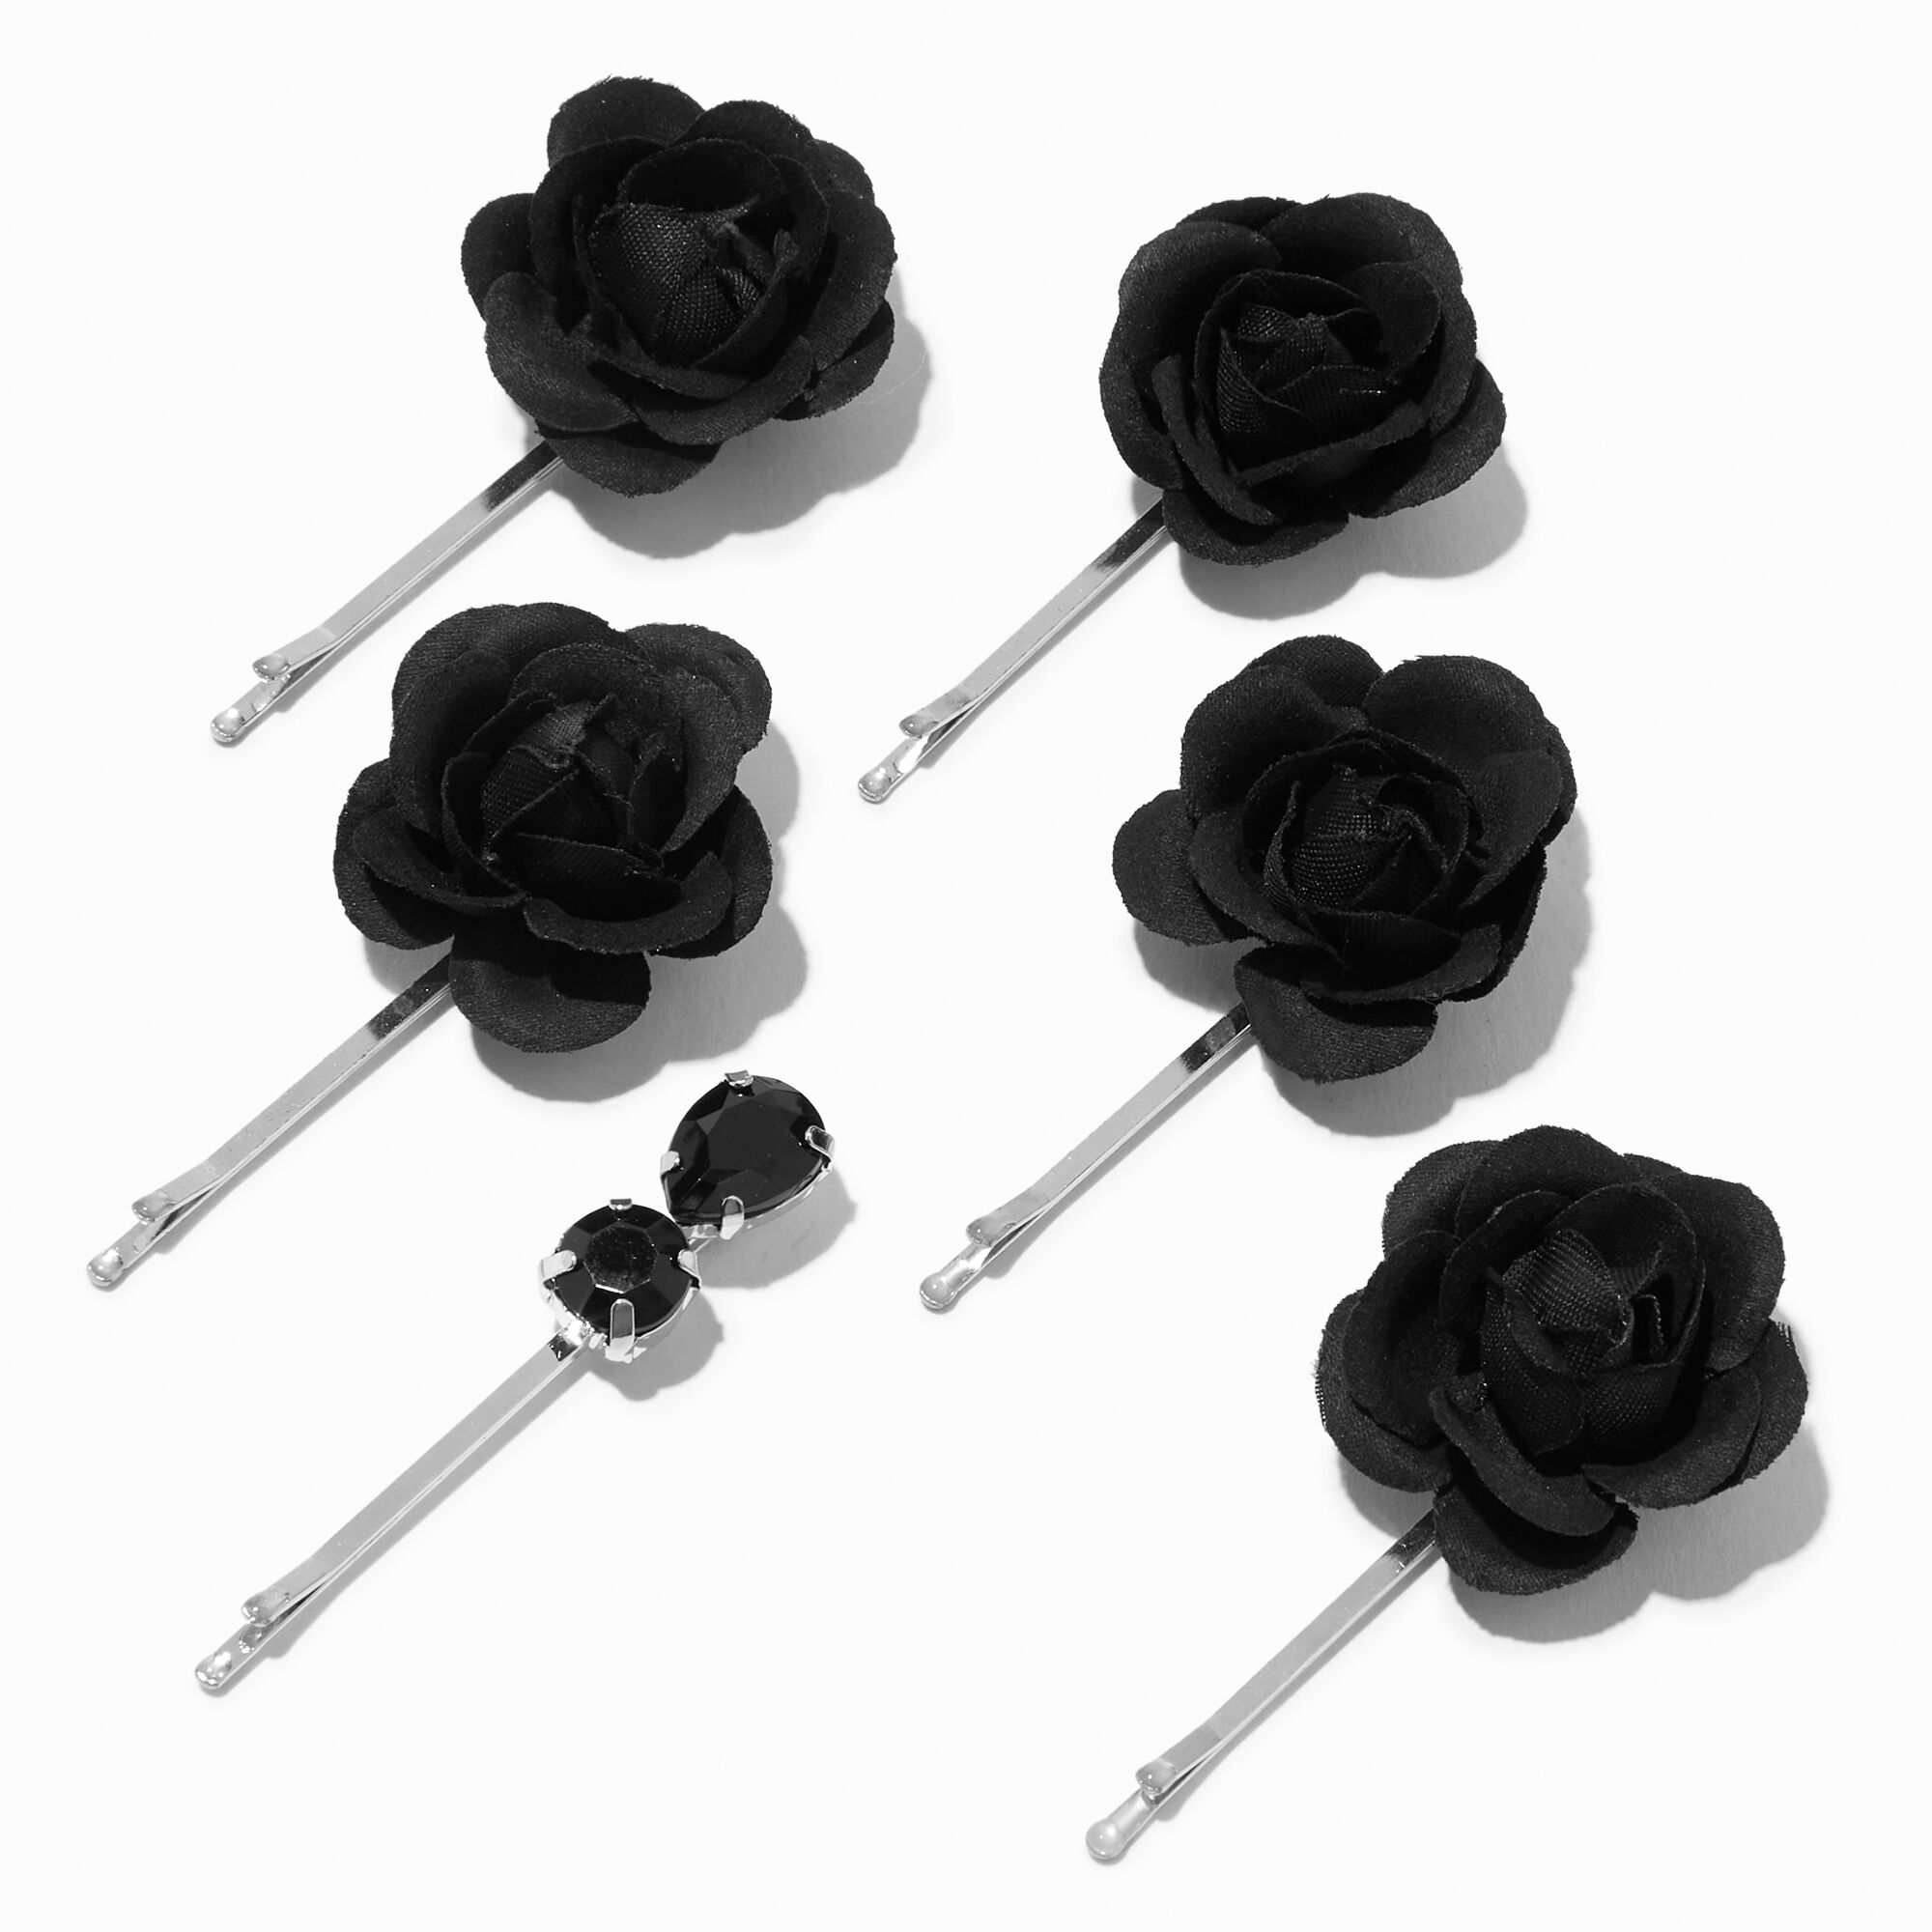 View Claires Flower Bobby Pins 6 Pack Black information